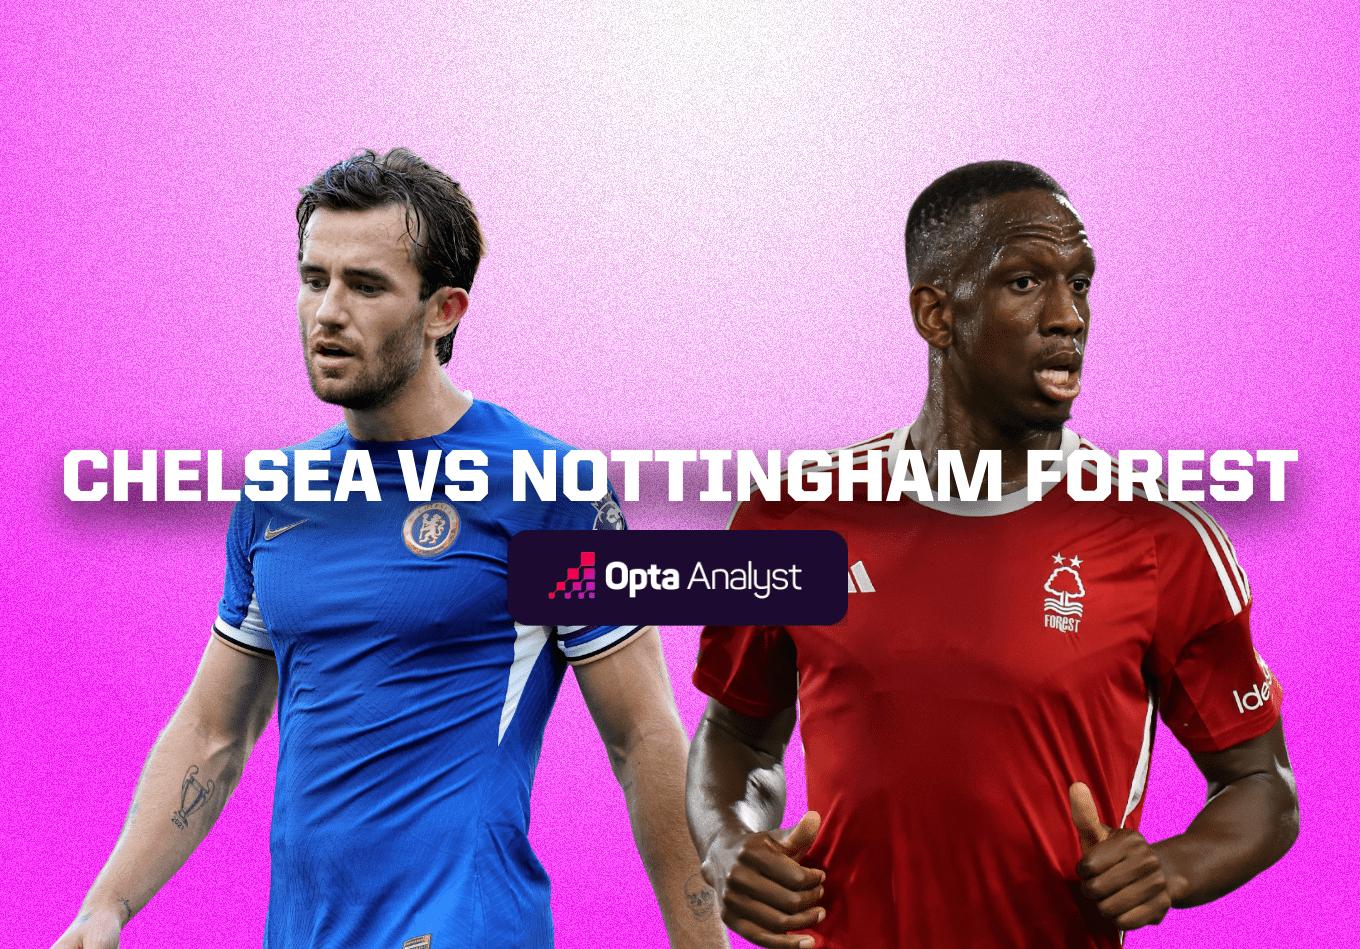 Chelsea vs Nottingham Forest: Preview and Prediction